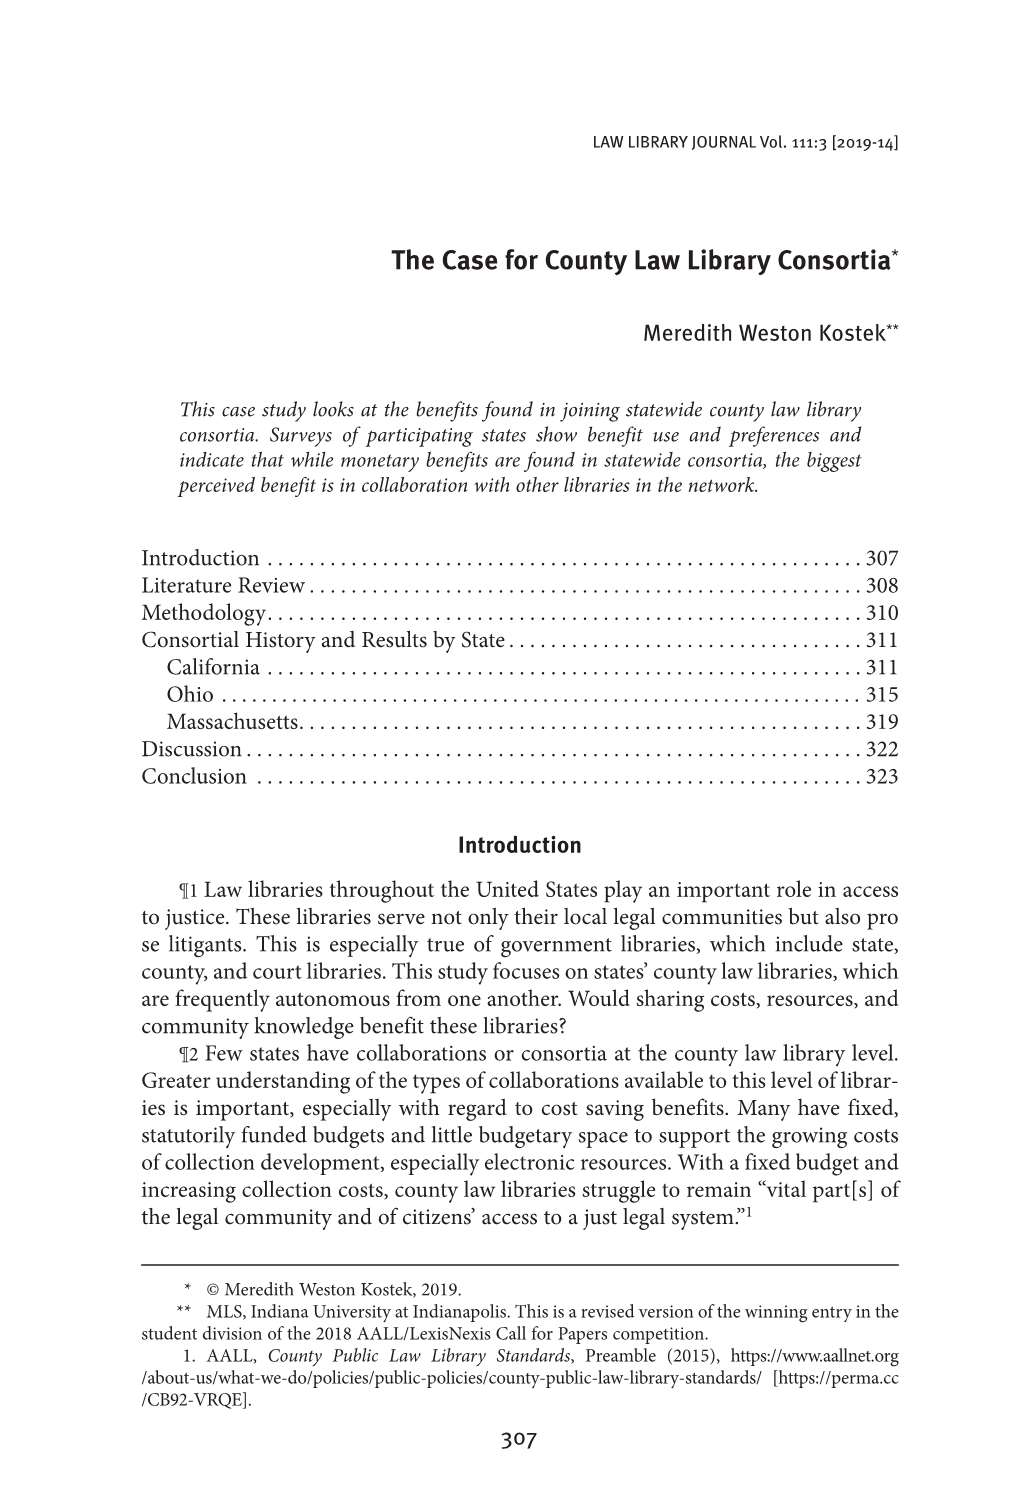 The Case for County Law Library Consortia*